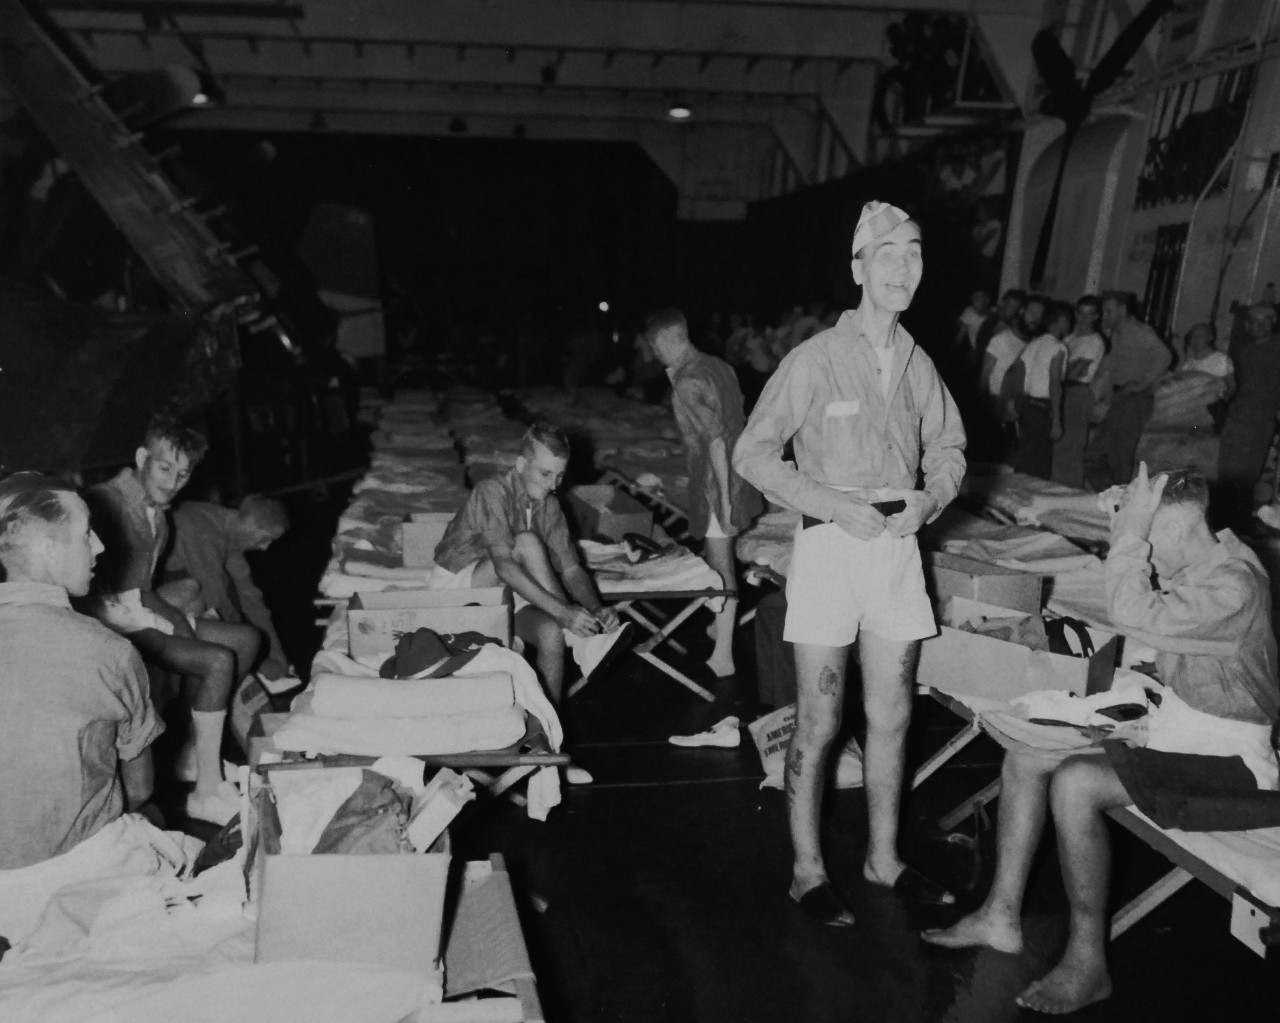 80-G-343560:   Allied Prisoners of War, 1945.   Bombardier Walter G. McFarlane, liberated after 3.5 years captive at Singapore enjoys the comforts provided on the hangar deck of USS Block Island (CVE-106).   Photographed by Photographer’s Mate First Class T.K. Brett, S 1945.  Official U.S. Navy photograph, now in the collection of the National Archives.  (2014/05/22).   The original photograph is small.   